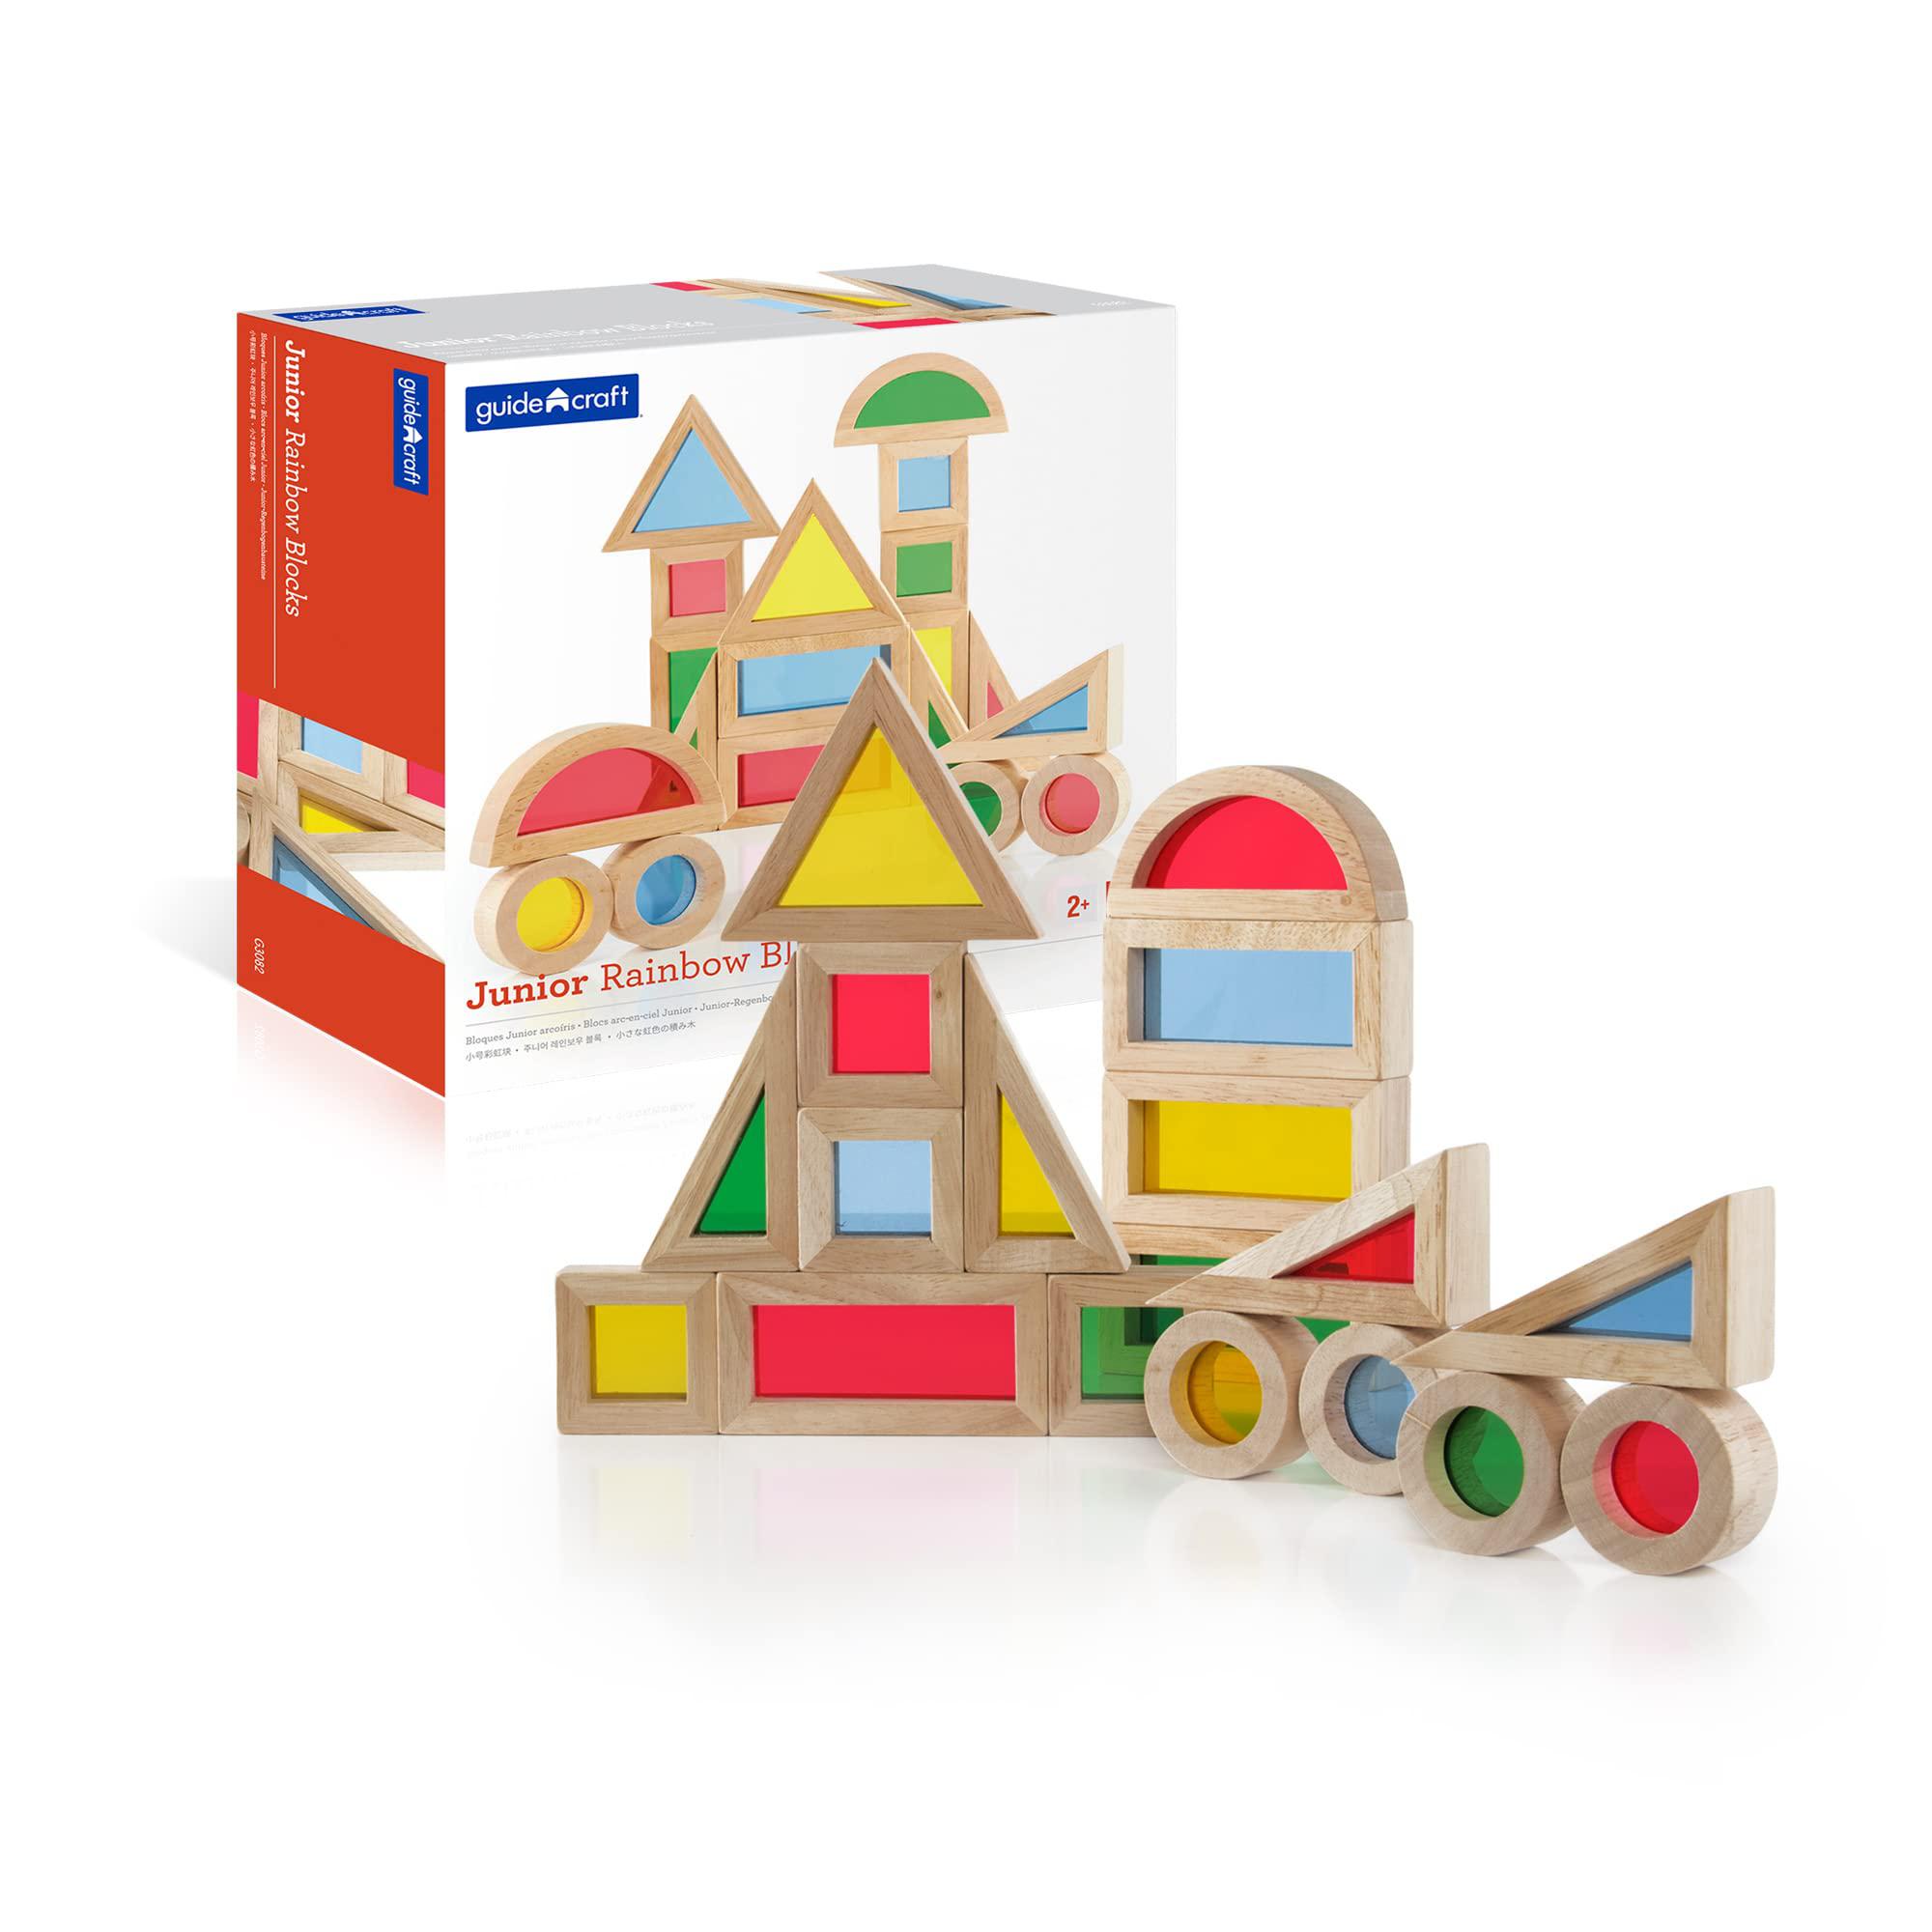 guidecraft jr. rainbow blocks 20 piece set: kids colorful learning and educational toy